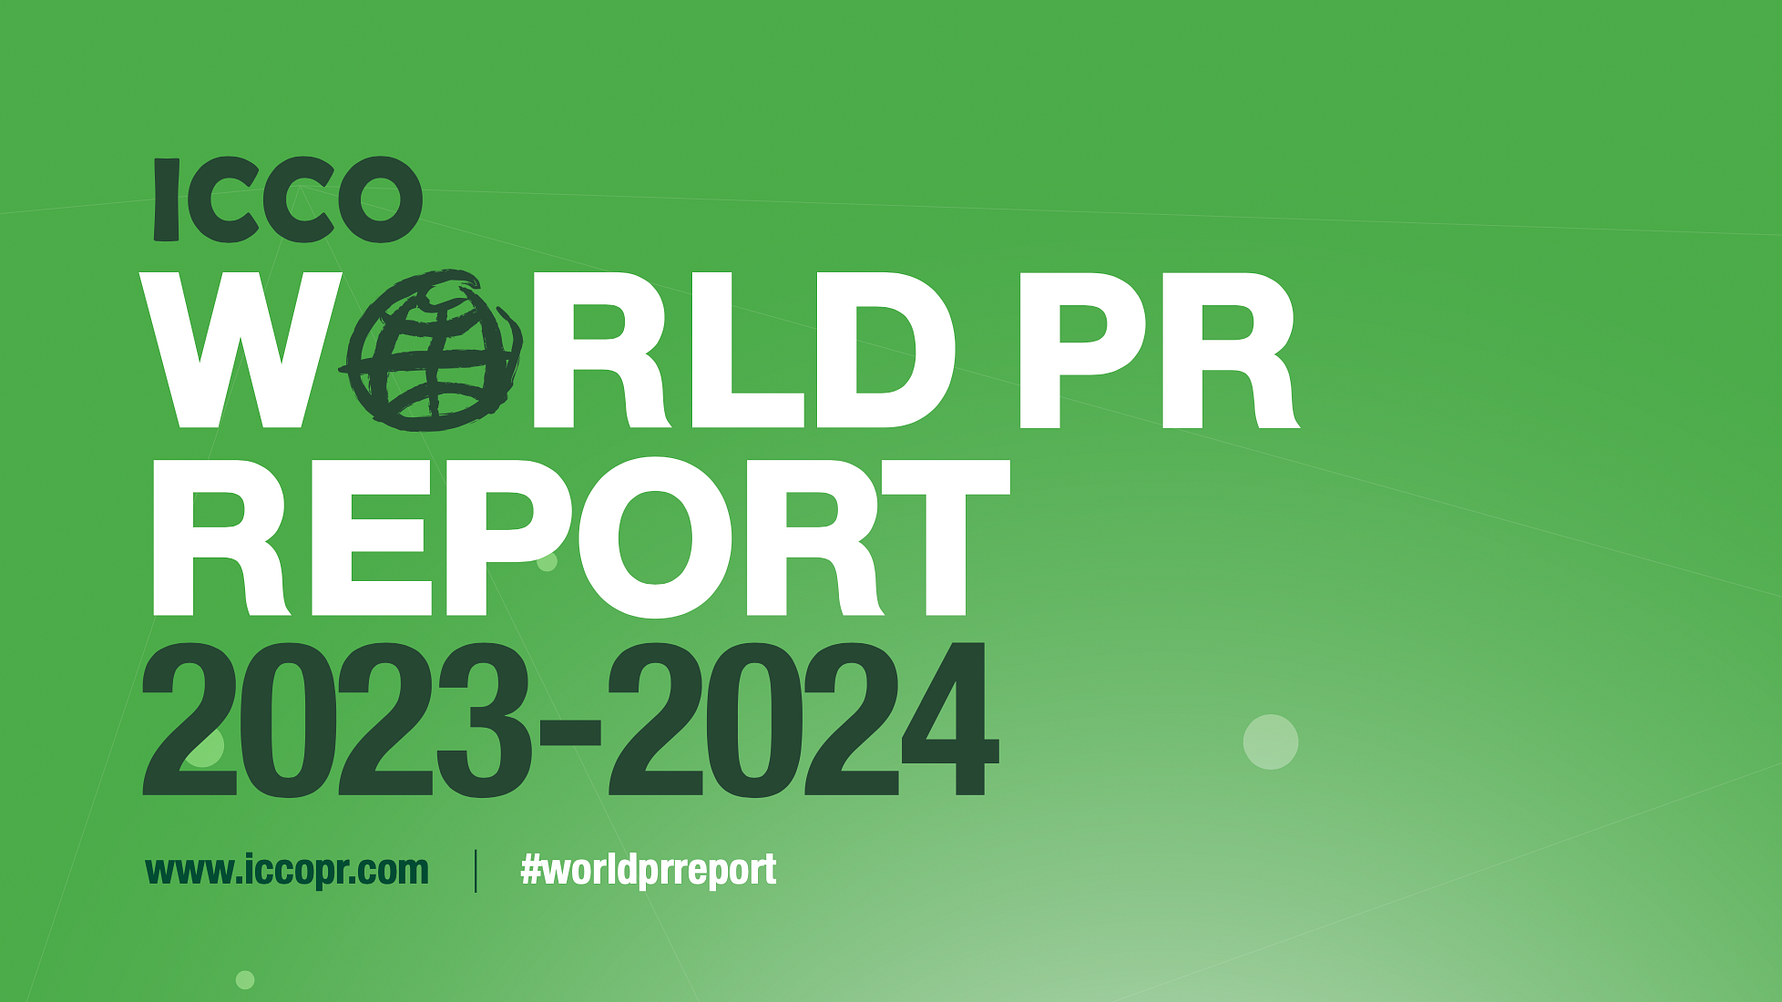 ESG and AI Top Priorities in ICCO World PR Report